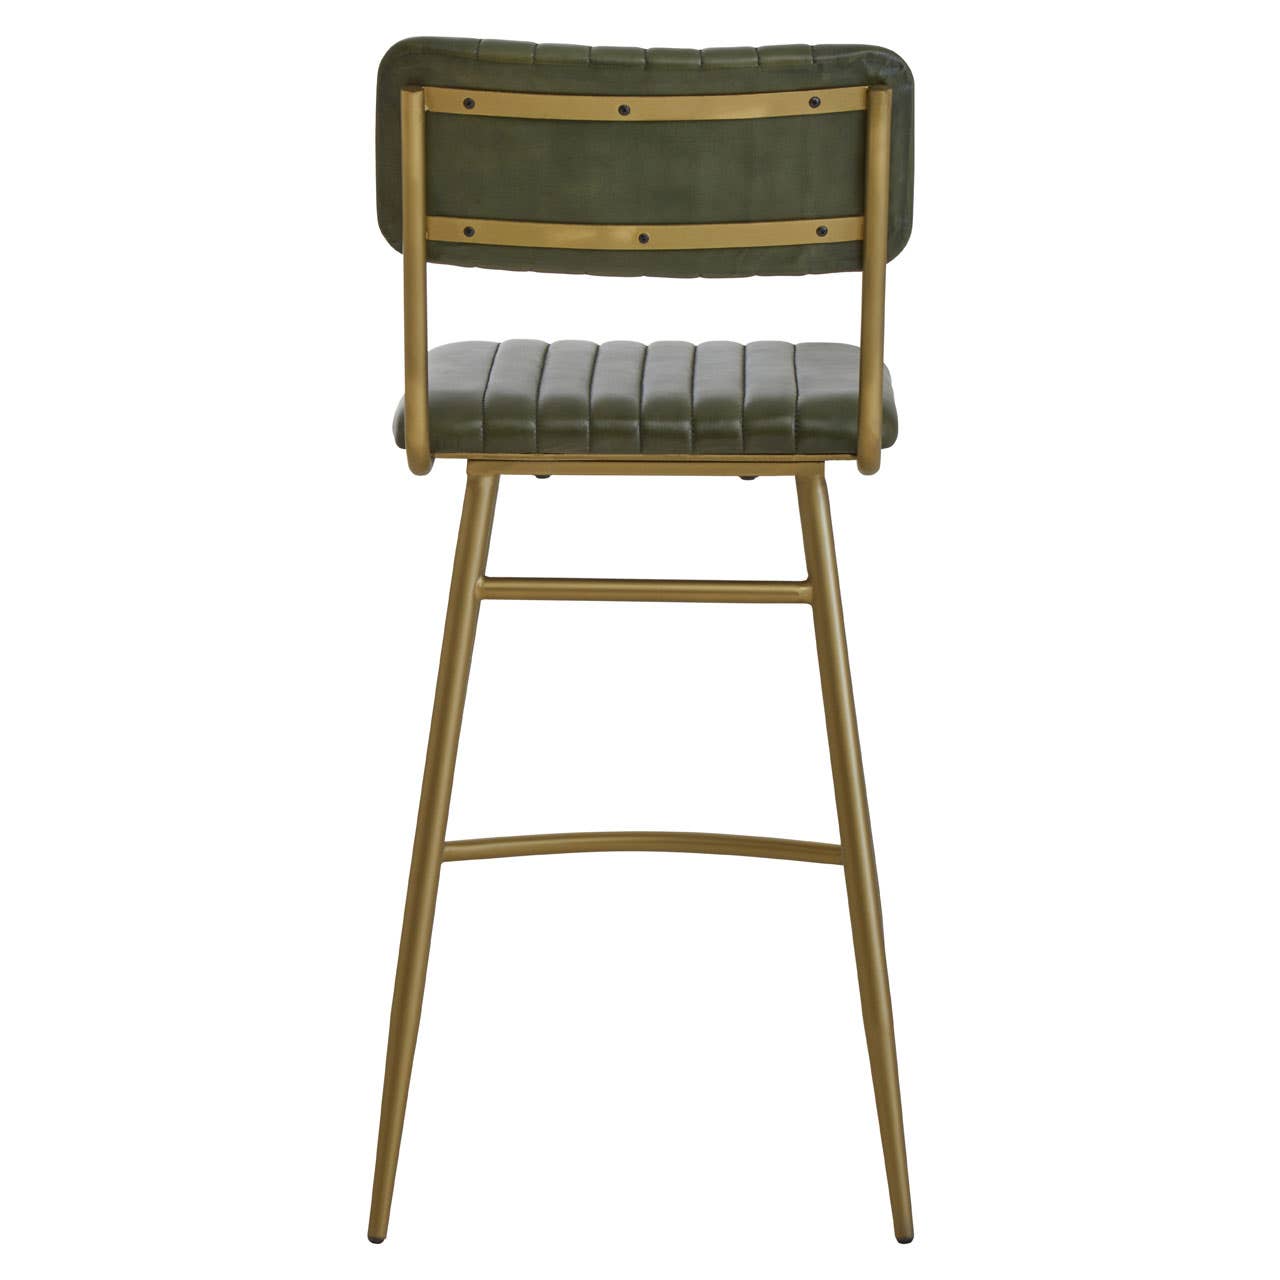 Piccadilly Olive Green Tufted Buffalo Leather Kitchen Bar Stool With Gold Legs